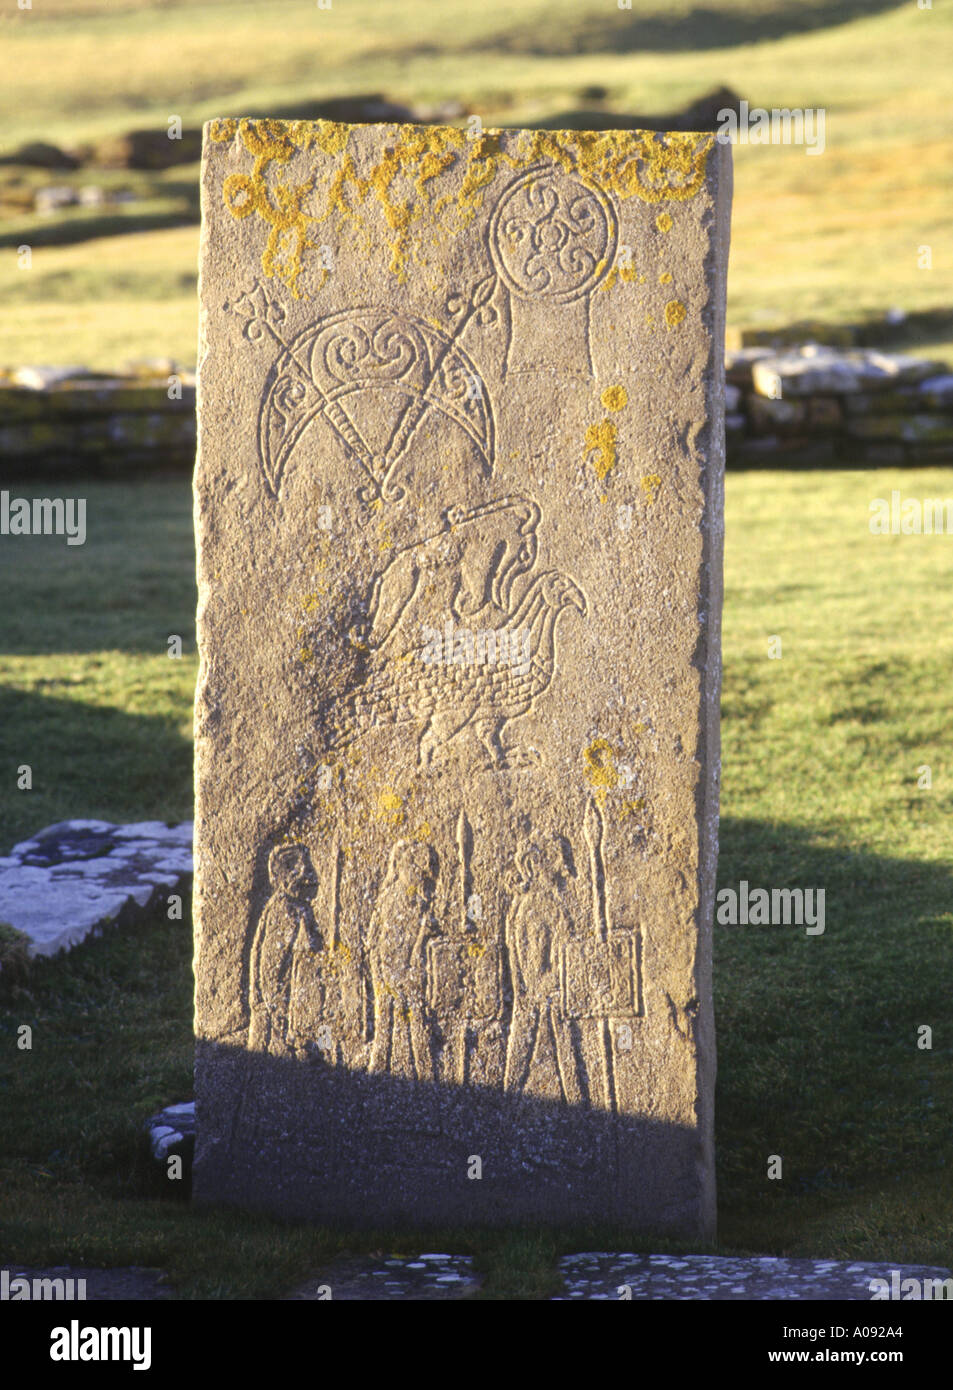 dh Brough of Birsay BIRSAY ORKNEY Pictish carving stone replica sculpt history engraving carved Stock Photo